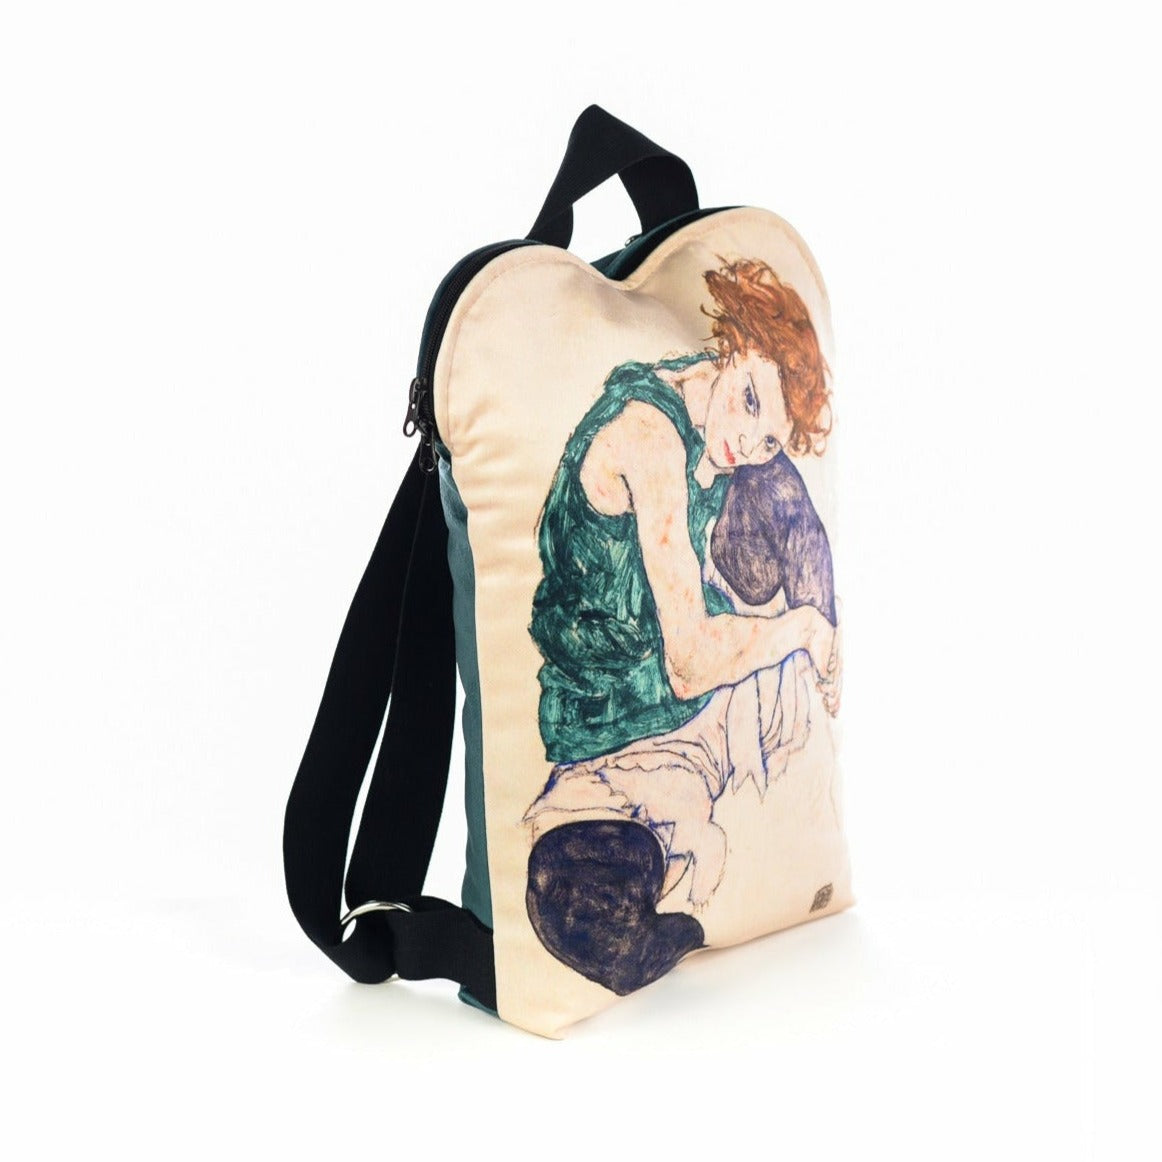 Backpack Egon Schiele "Seated Woman with Legs Drawn Up"